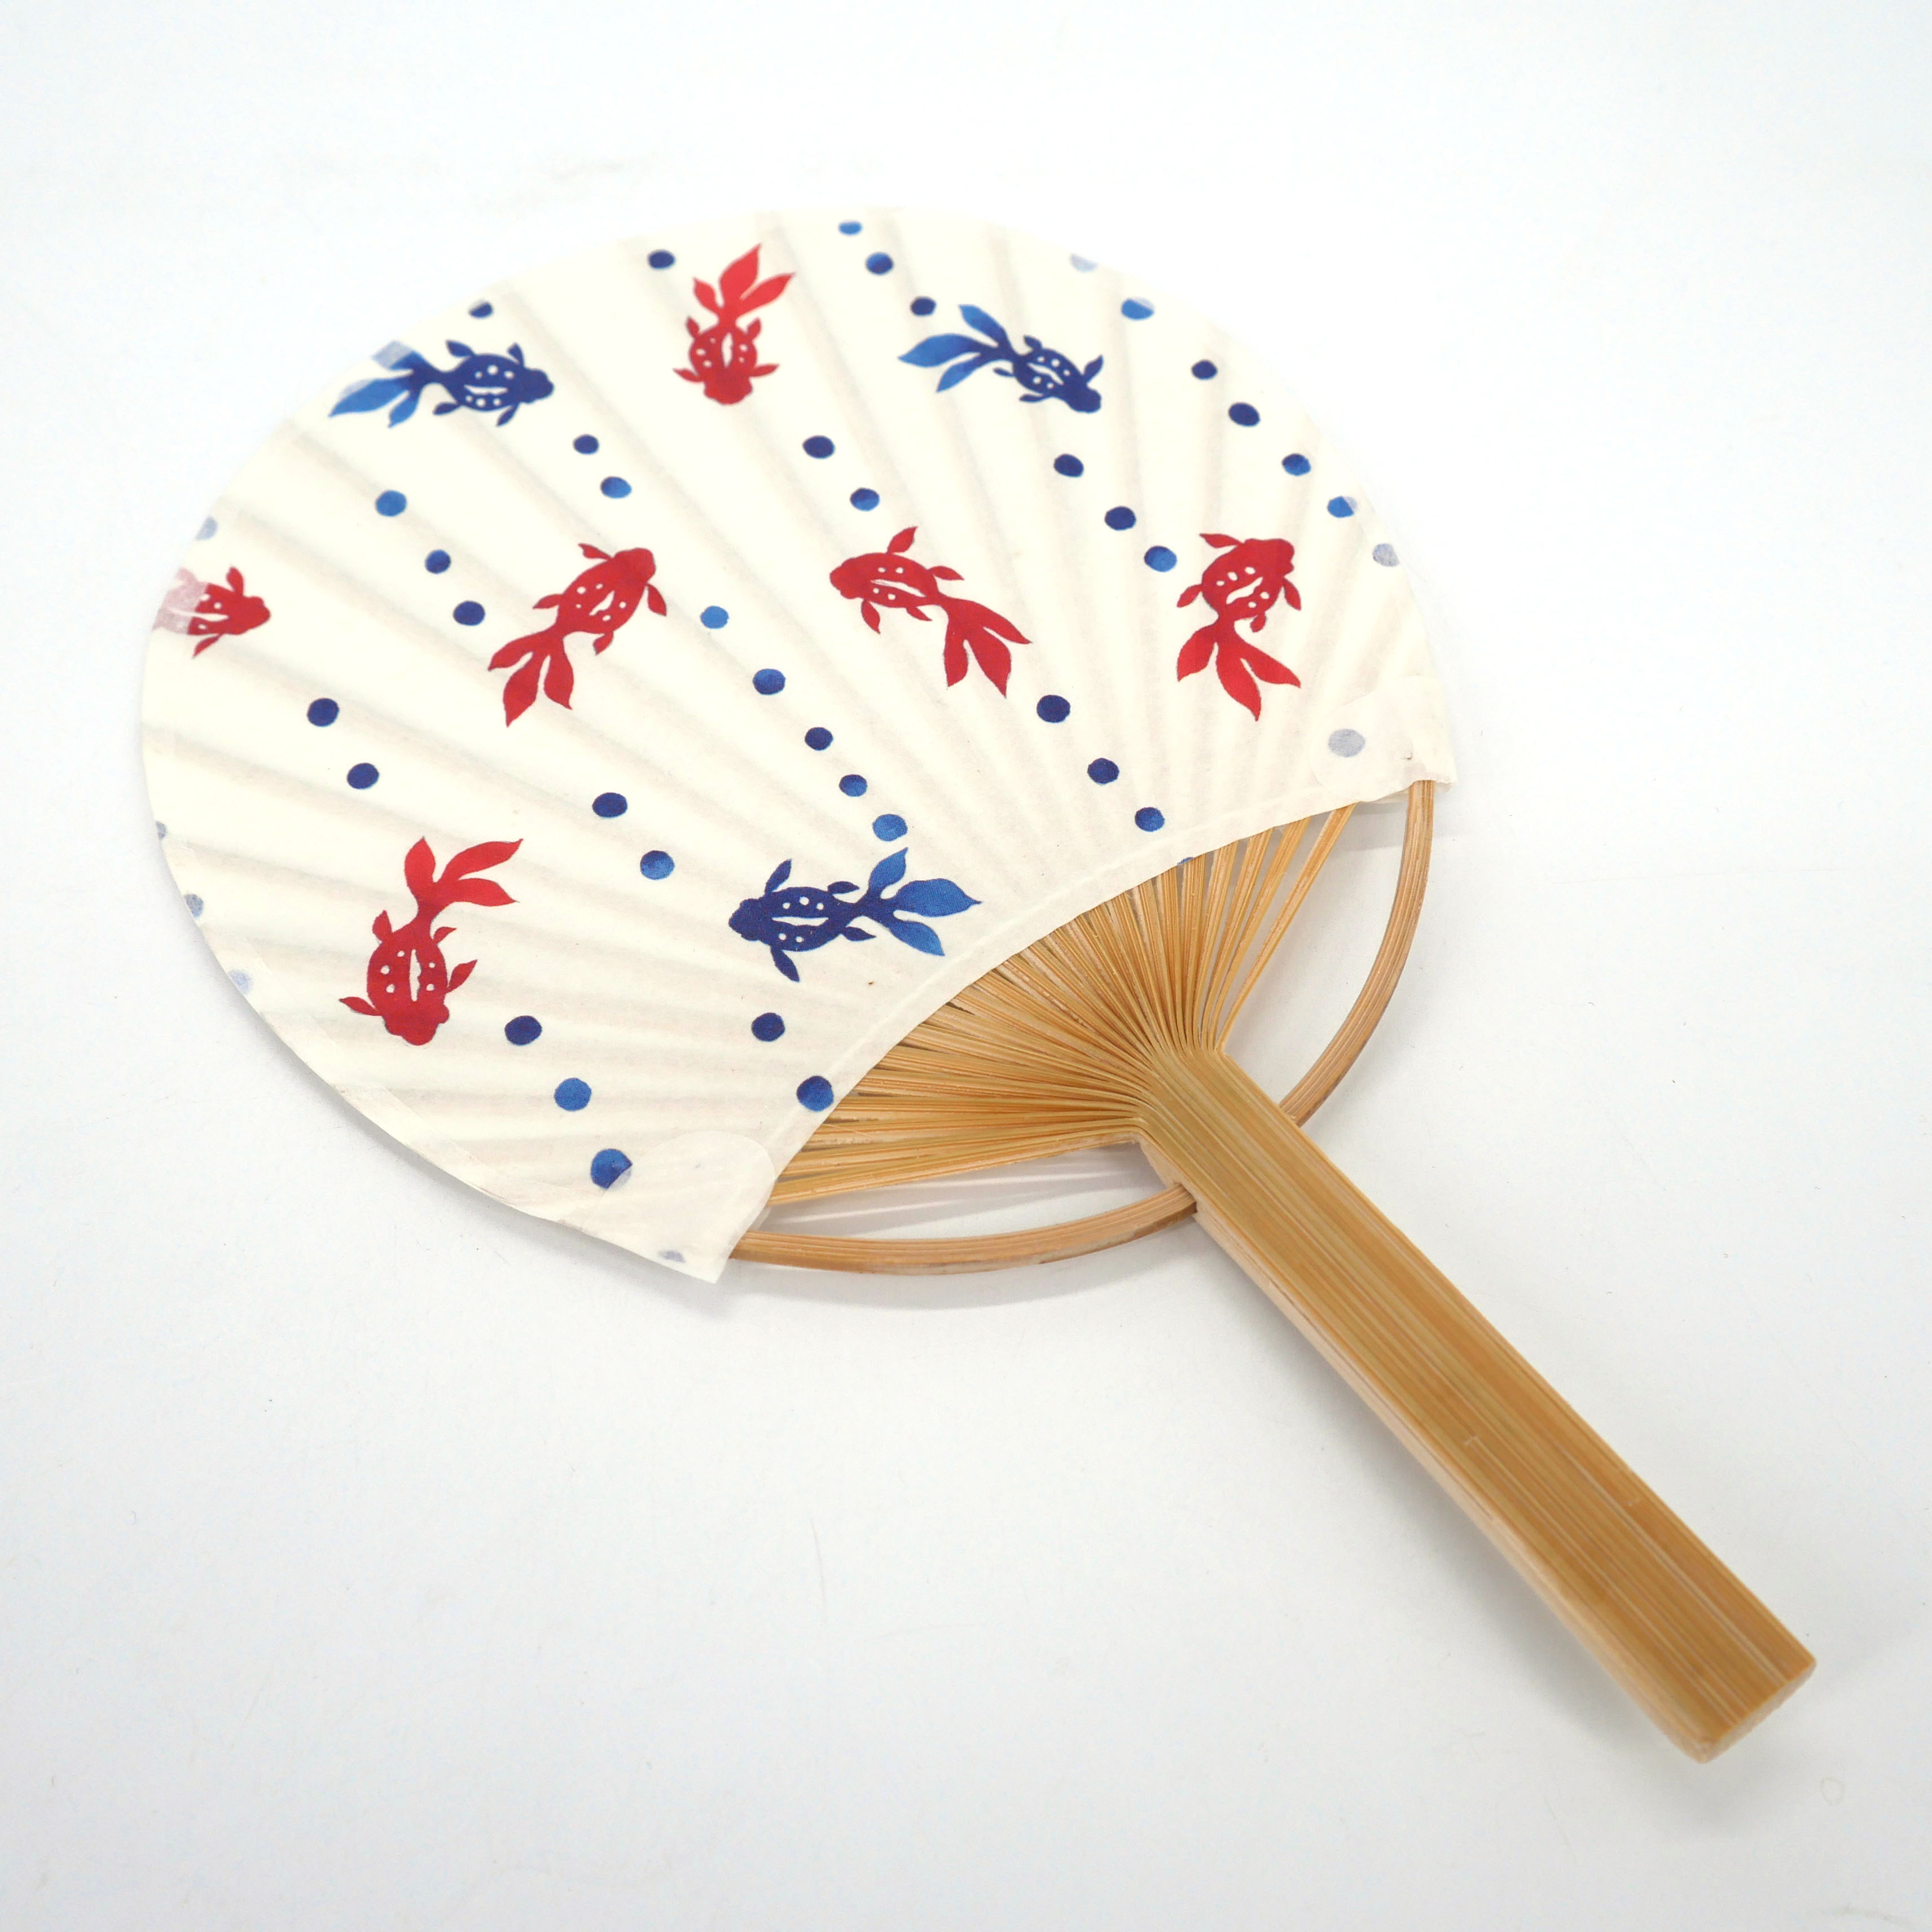 https://nipponboutique.fr/37112/small-japanese-non-folding-uchiwa-fan-in-paper-and-bamboo-with-red-and-blue-fish-pattern-sakana-aka-aoi-175x115-cm.jpg